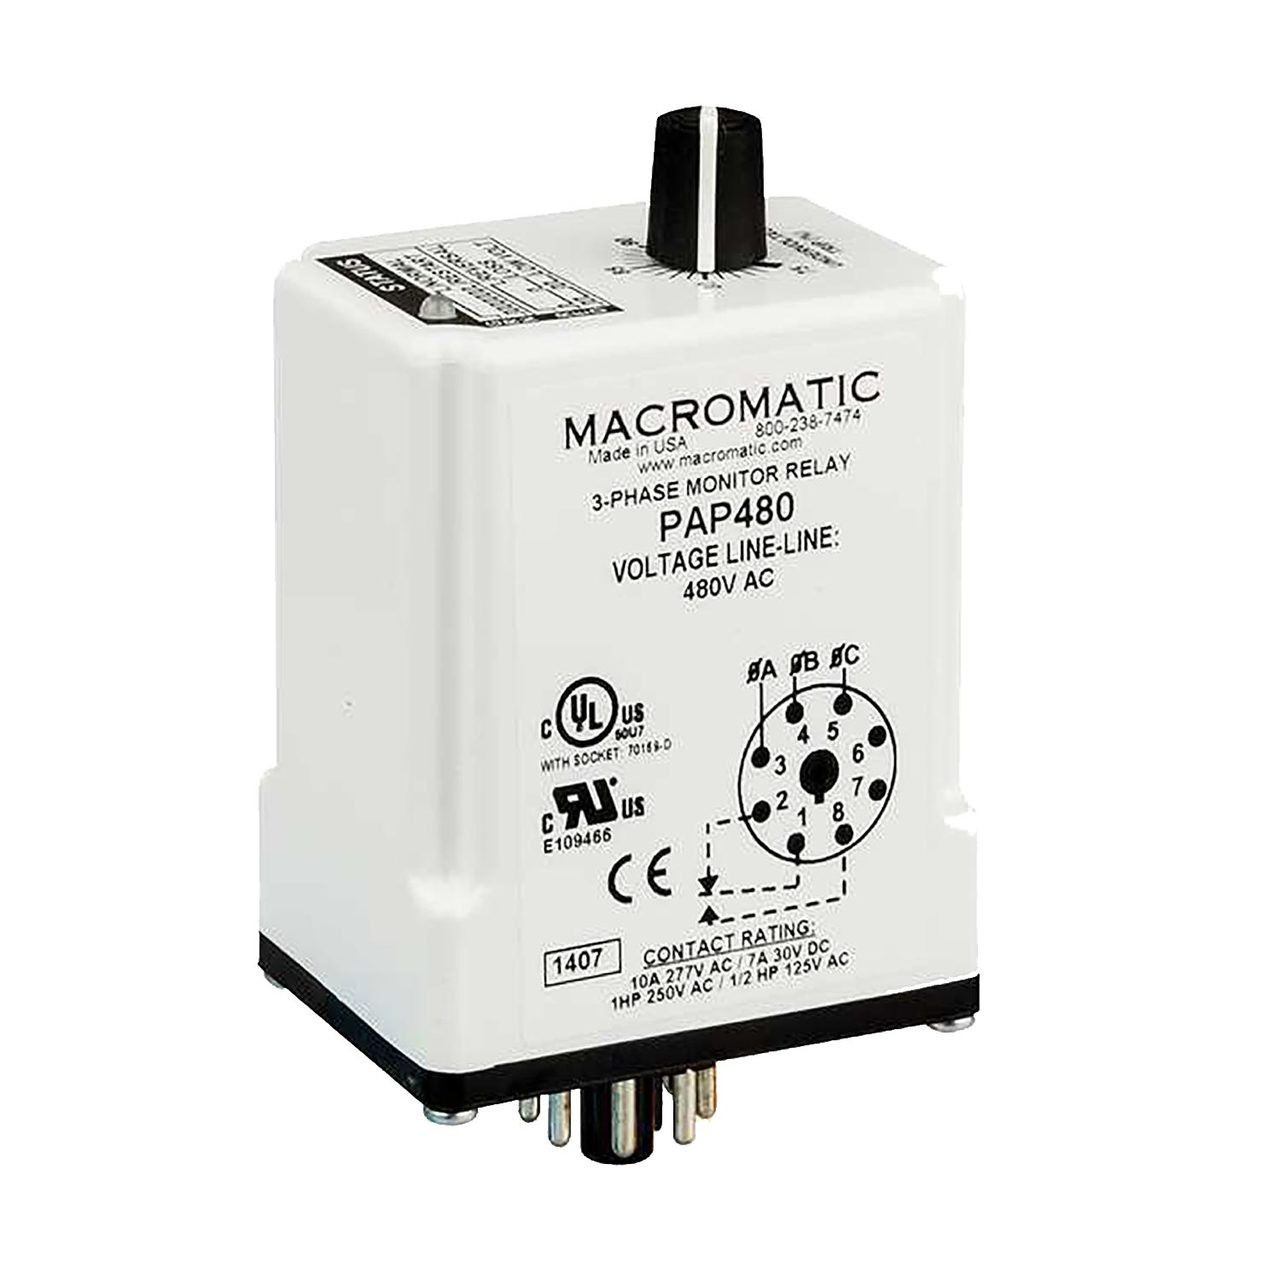 Macromatic PAP240 - PAP Phase Monitor Relay